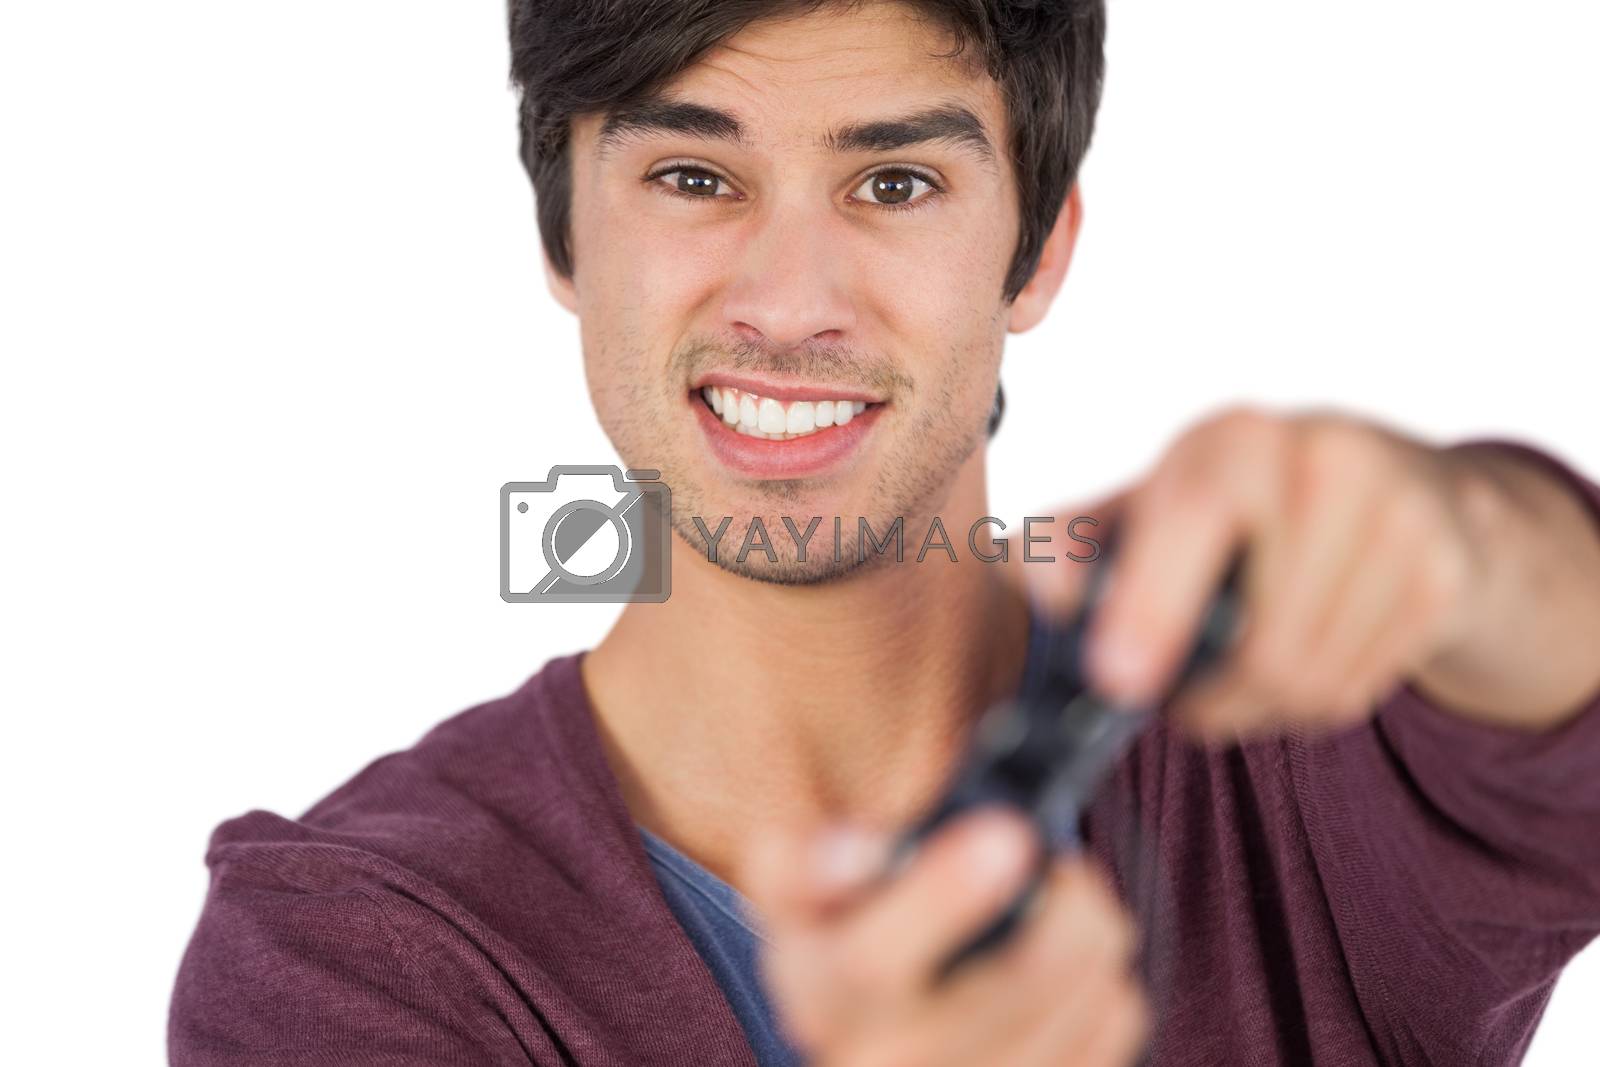 Royalty free image of Young adult playing video games by Wavebreakmedia